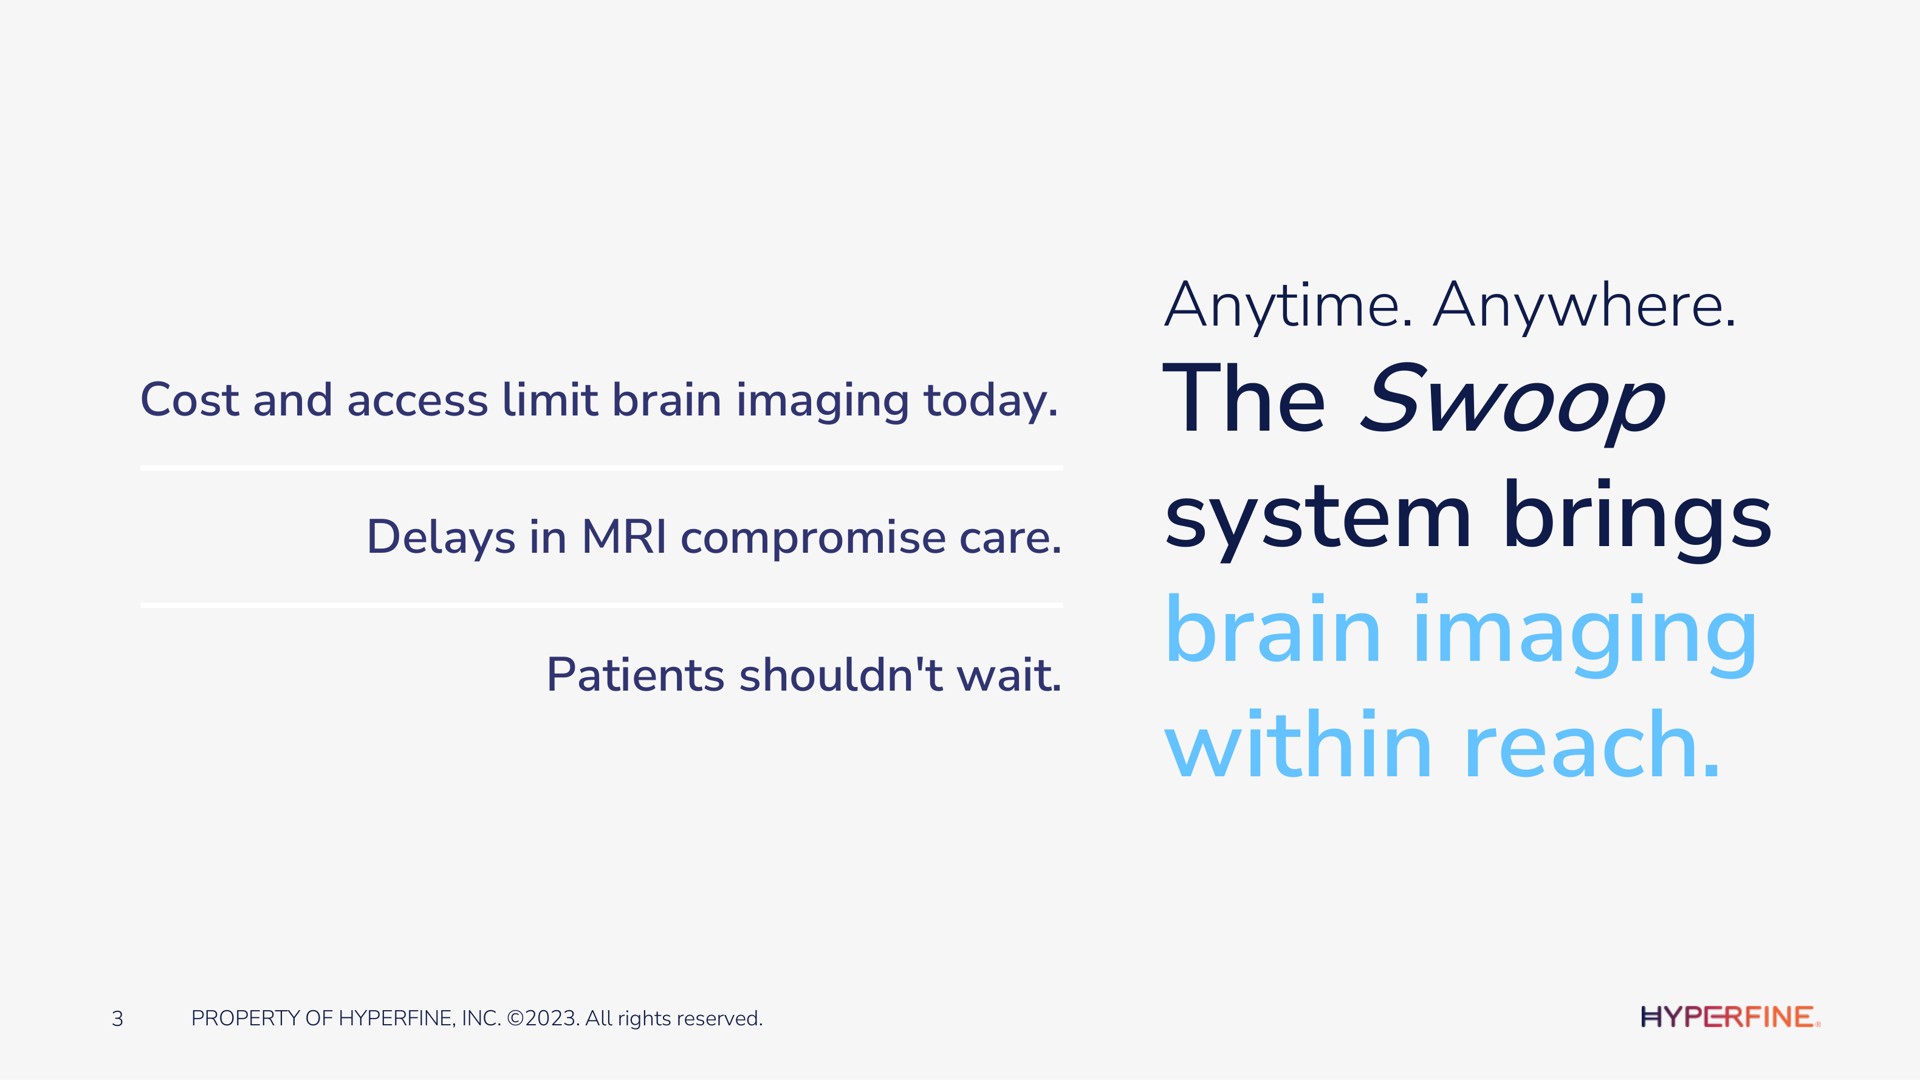 cost and access limit brain imaging today delays in compromise care patients wait anywhere the swoop system brings brain imaging within reach | Hyperfine